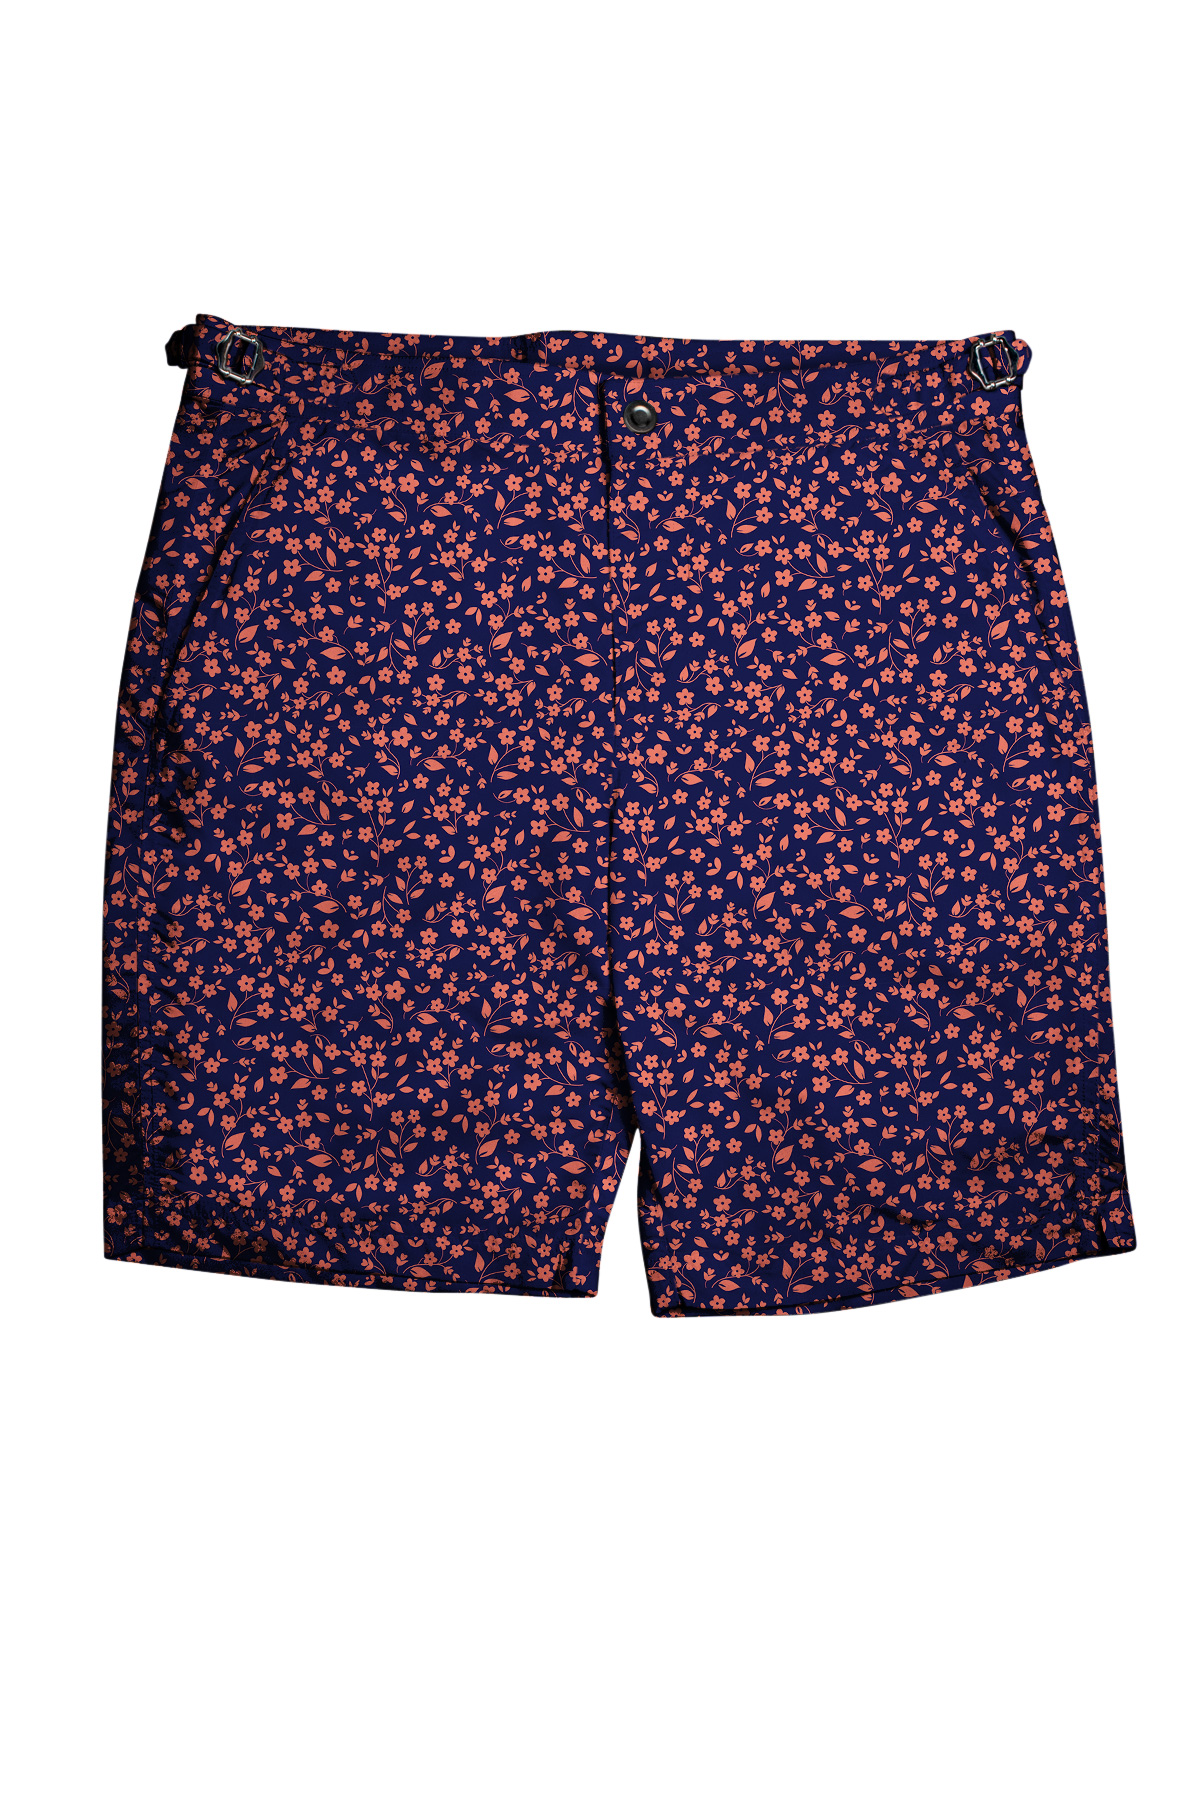 Navy with Salmon Small Flowers Swim Shorts